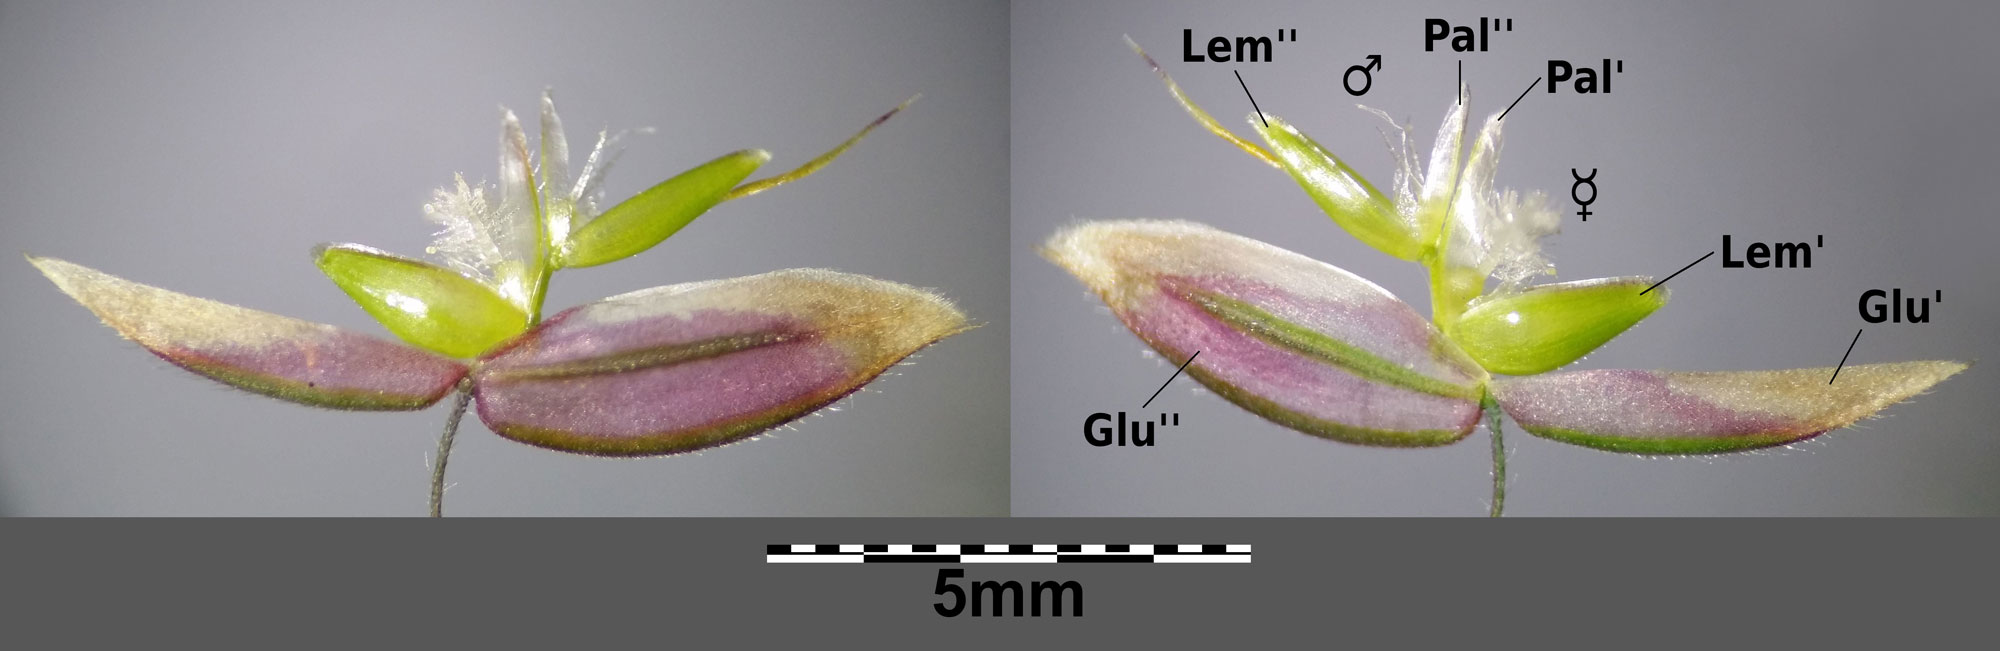 Photographs of a spikelet of velvet grass in two orientations, showing both sides of the spikelet. Labels on the right image indicate the two glumes at the base of the spikelet with two florets above. The lemma, palea, and reproductive parts of each floret are labeled. The lower florest is bisexual, the upper floret is male.